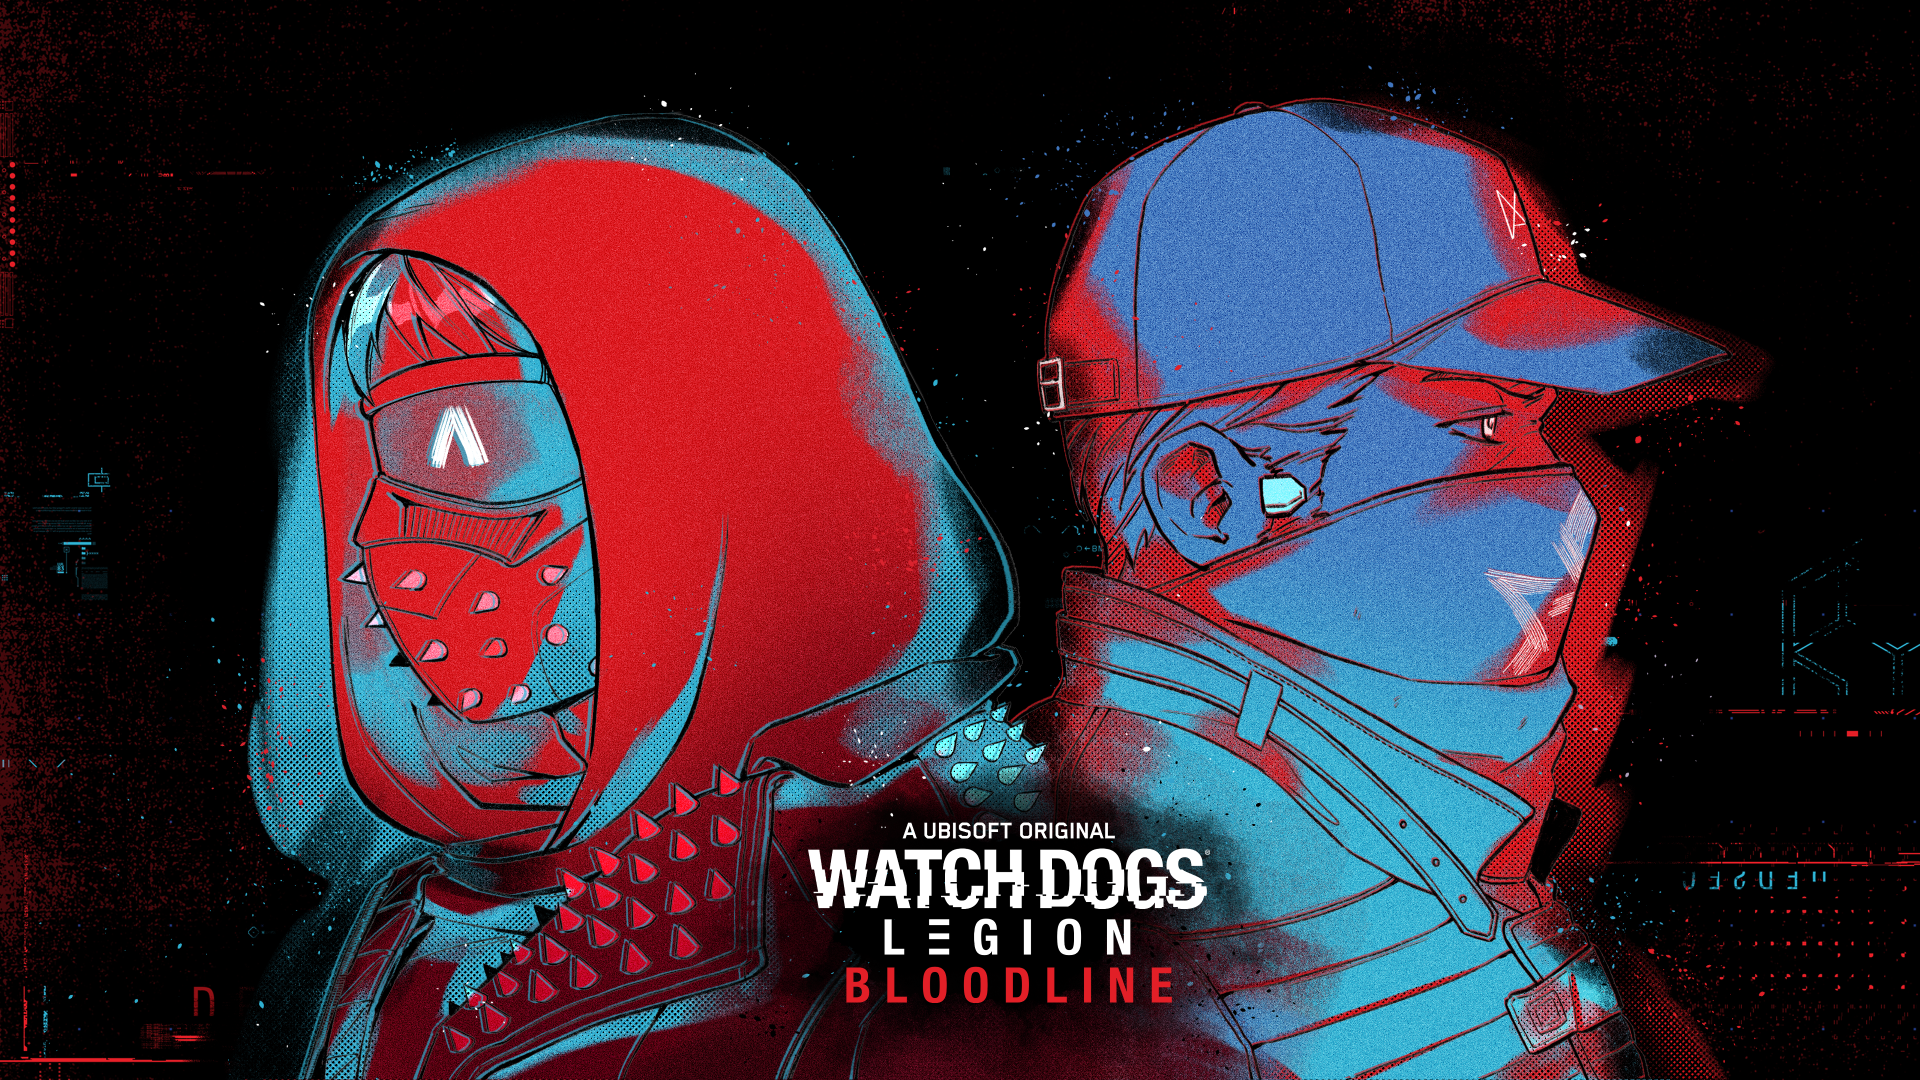 Aiden Pearce and Wrench show up in Watch Dogs: Legion - Bloodline DLC